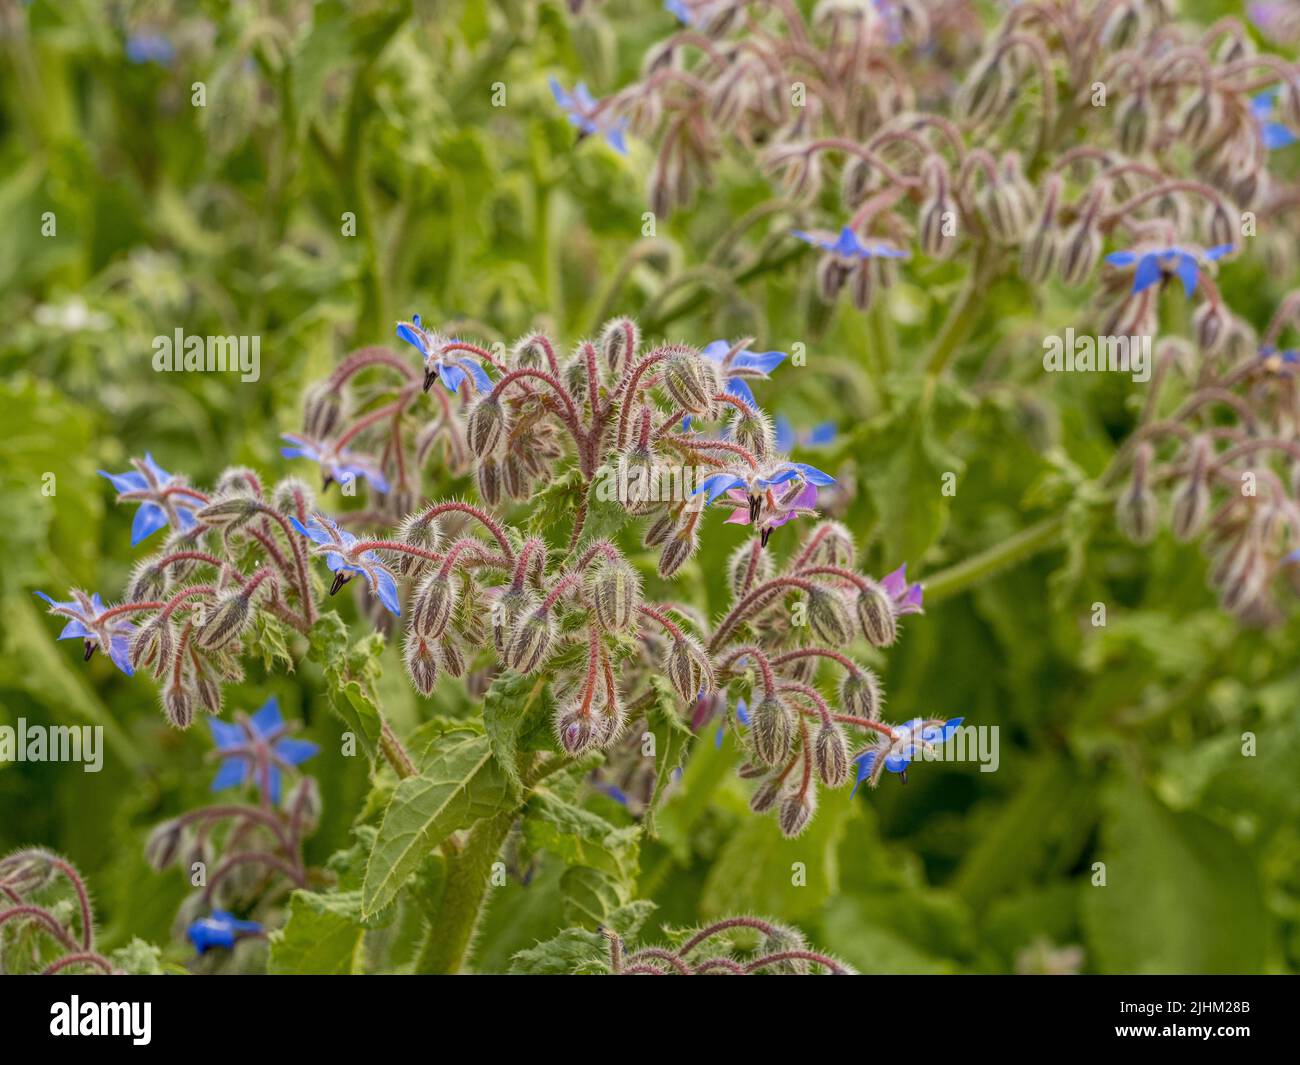 Blue Borage flowers and buds growing in a UK garden Stock Photo